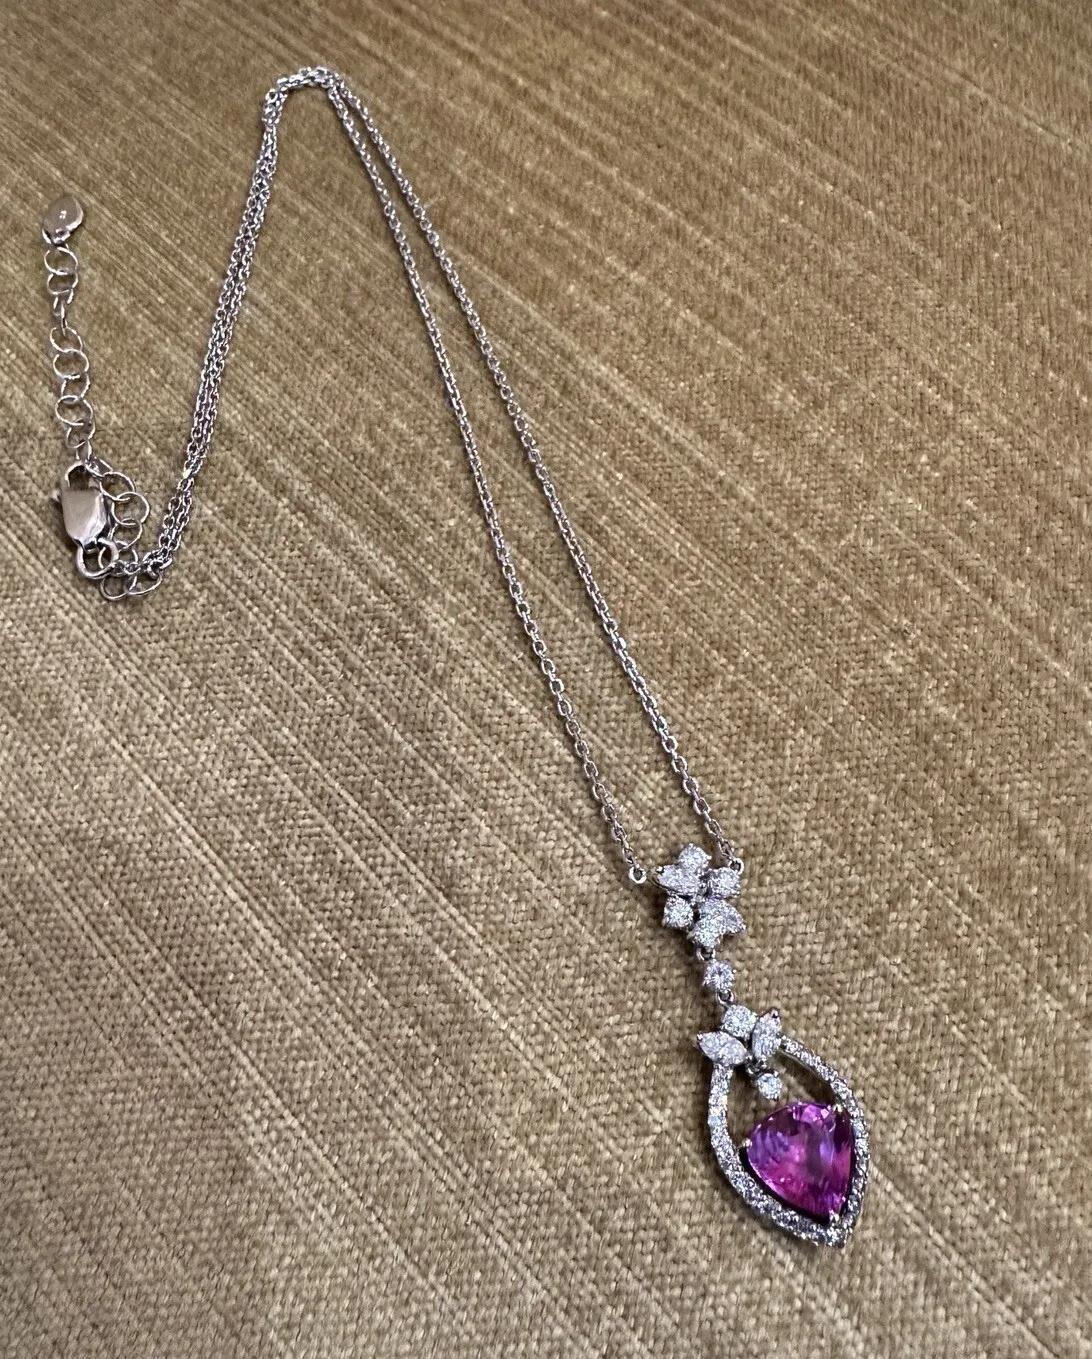 Certified Pink Sapphire and Diamond Pendant Necklace in 18k White Gold

Natural Pink Sapphire and Diamond Necklace features a Purplish-Pink Modified Heart Mixed Cut Sapphire in the center of the pendant surrounded by Round and Marquise Diamonds, all